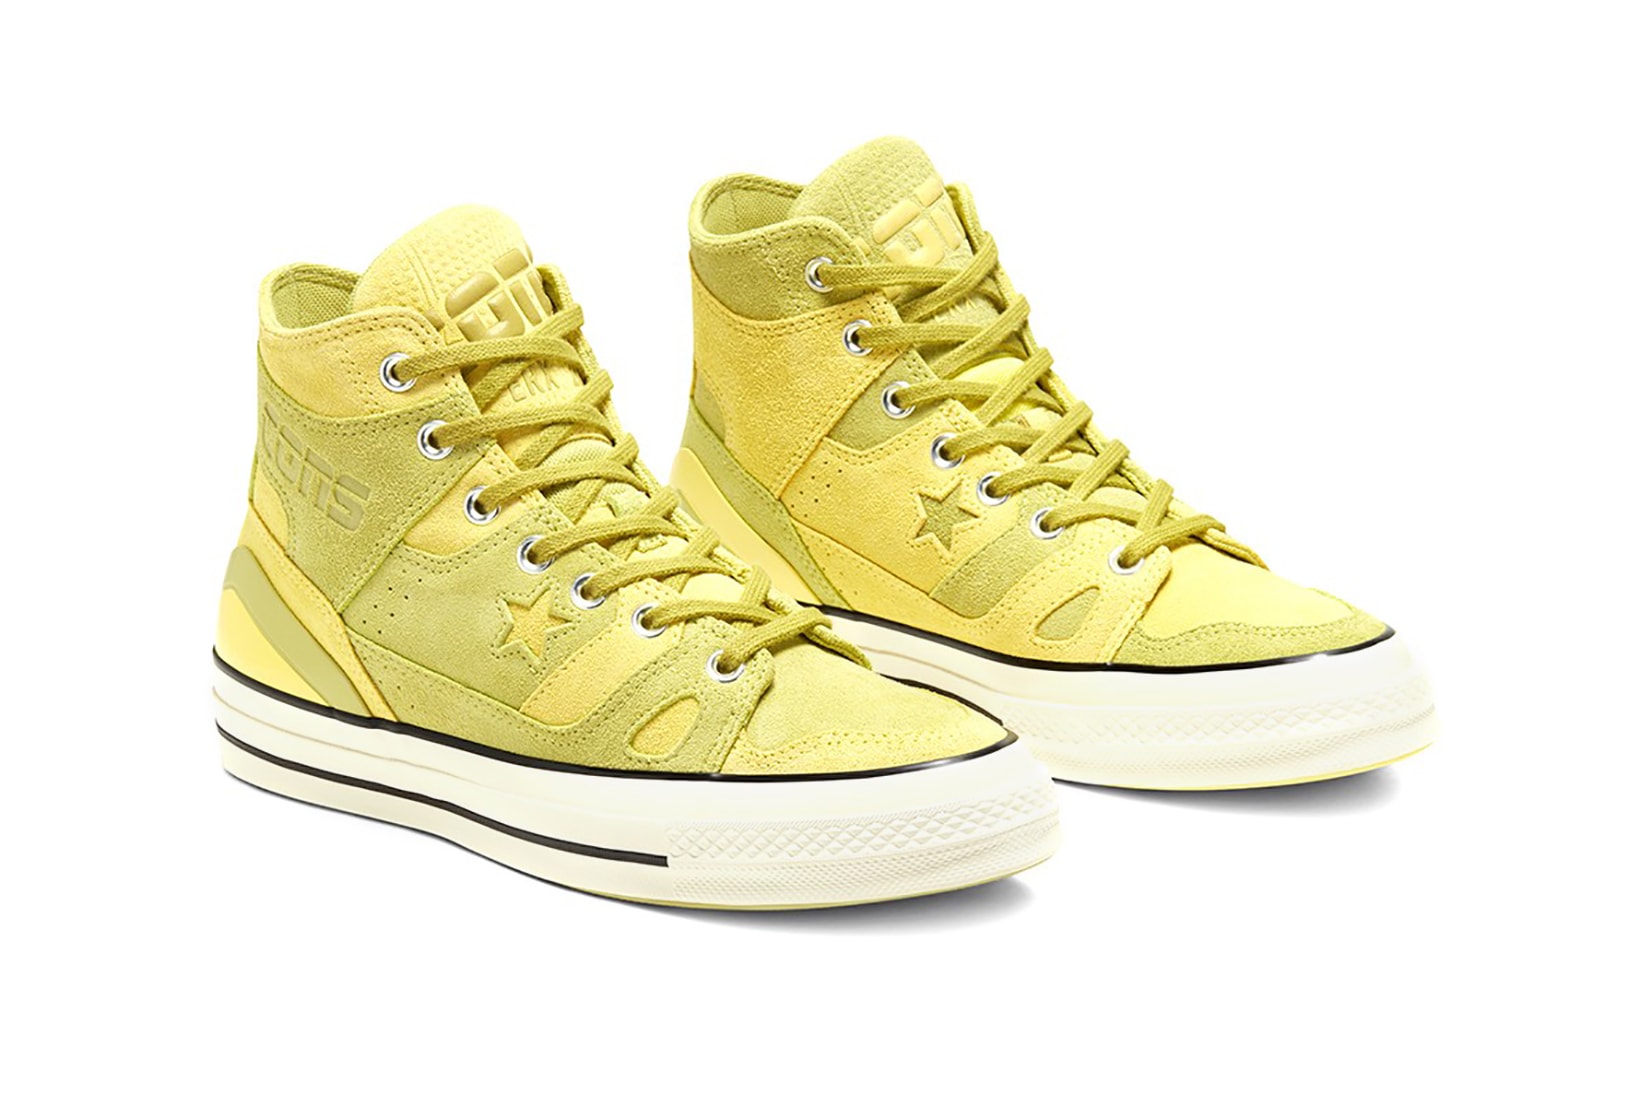 converse earth tone suede pack pro leather one star chuck 70 e260 sneakers shoes sneakerhead footwear